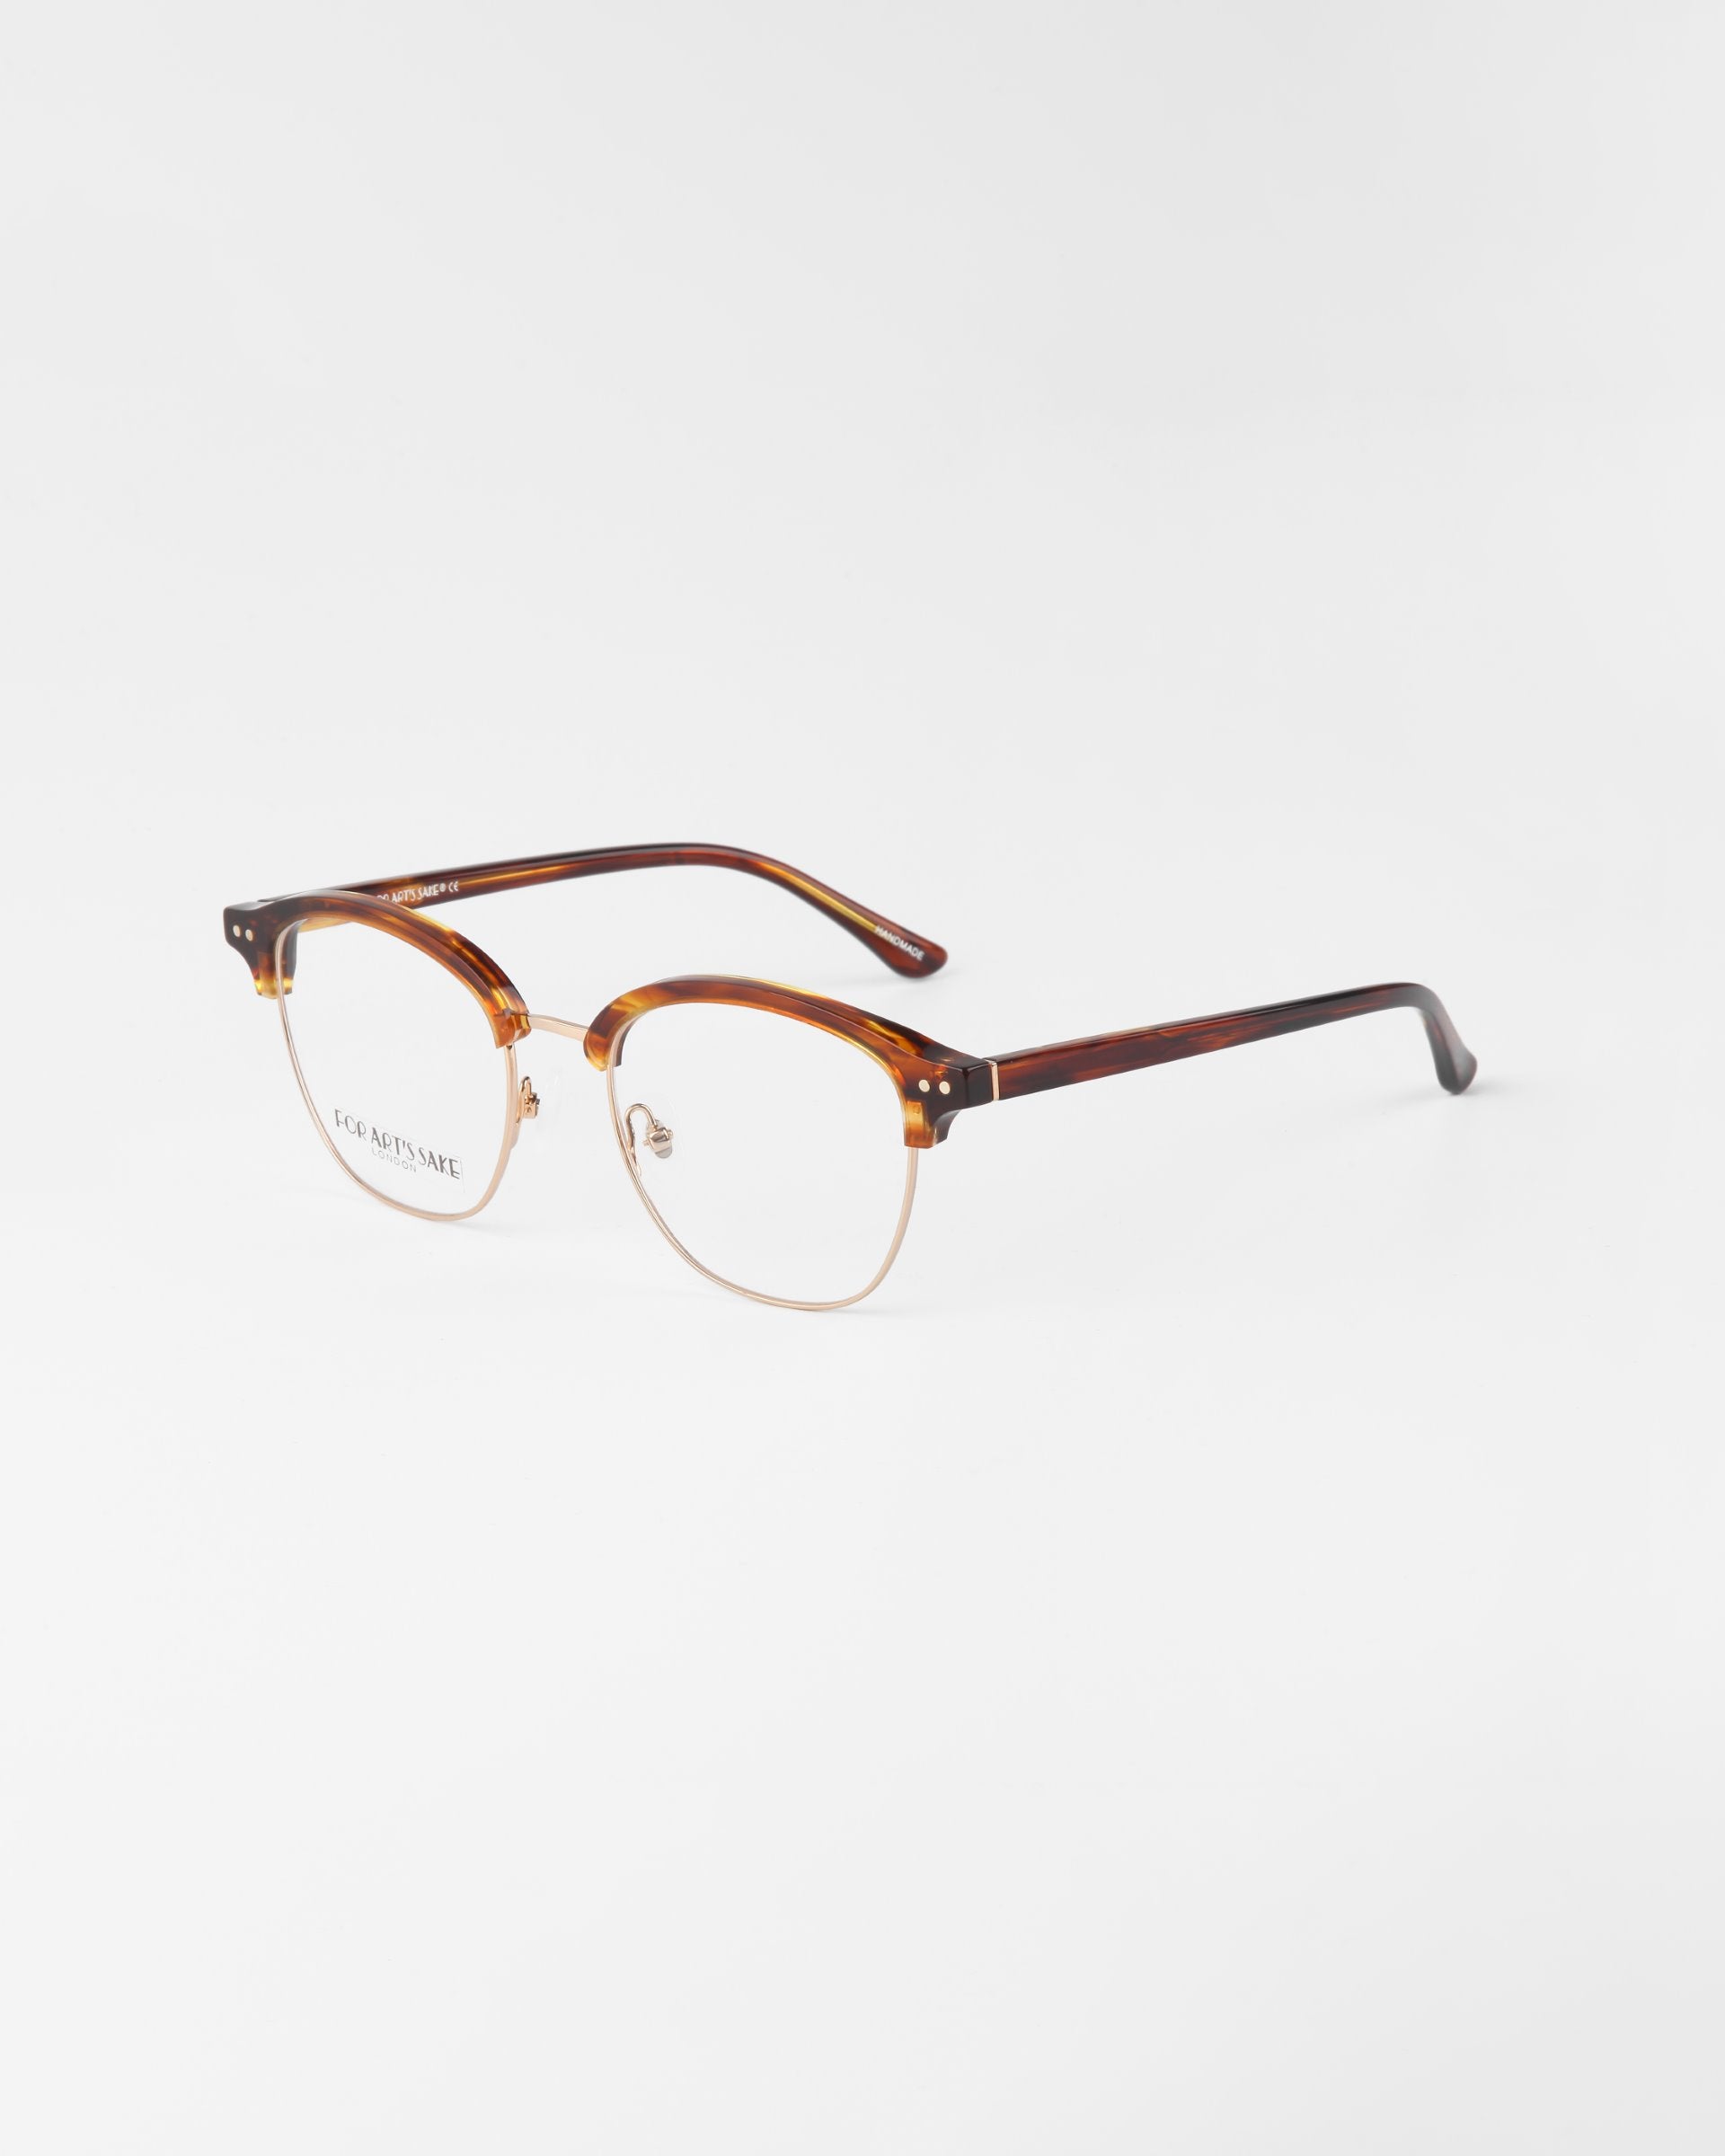 A pair of eyeglasses with a brown upper frame and metal lower rims. The frames have a sleek, modern design and temple arms that match the upper frame color. Featuring Blue Light Filter technology, these glasses are perfect for everyday screen use. The plain white background highlights the Painkiller by For Art's Sake® beautifully.